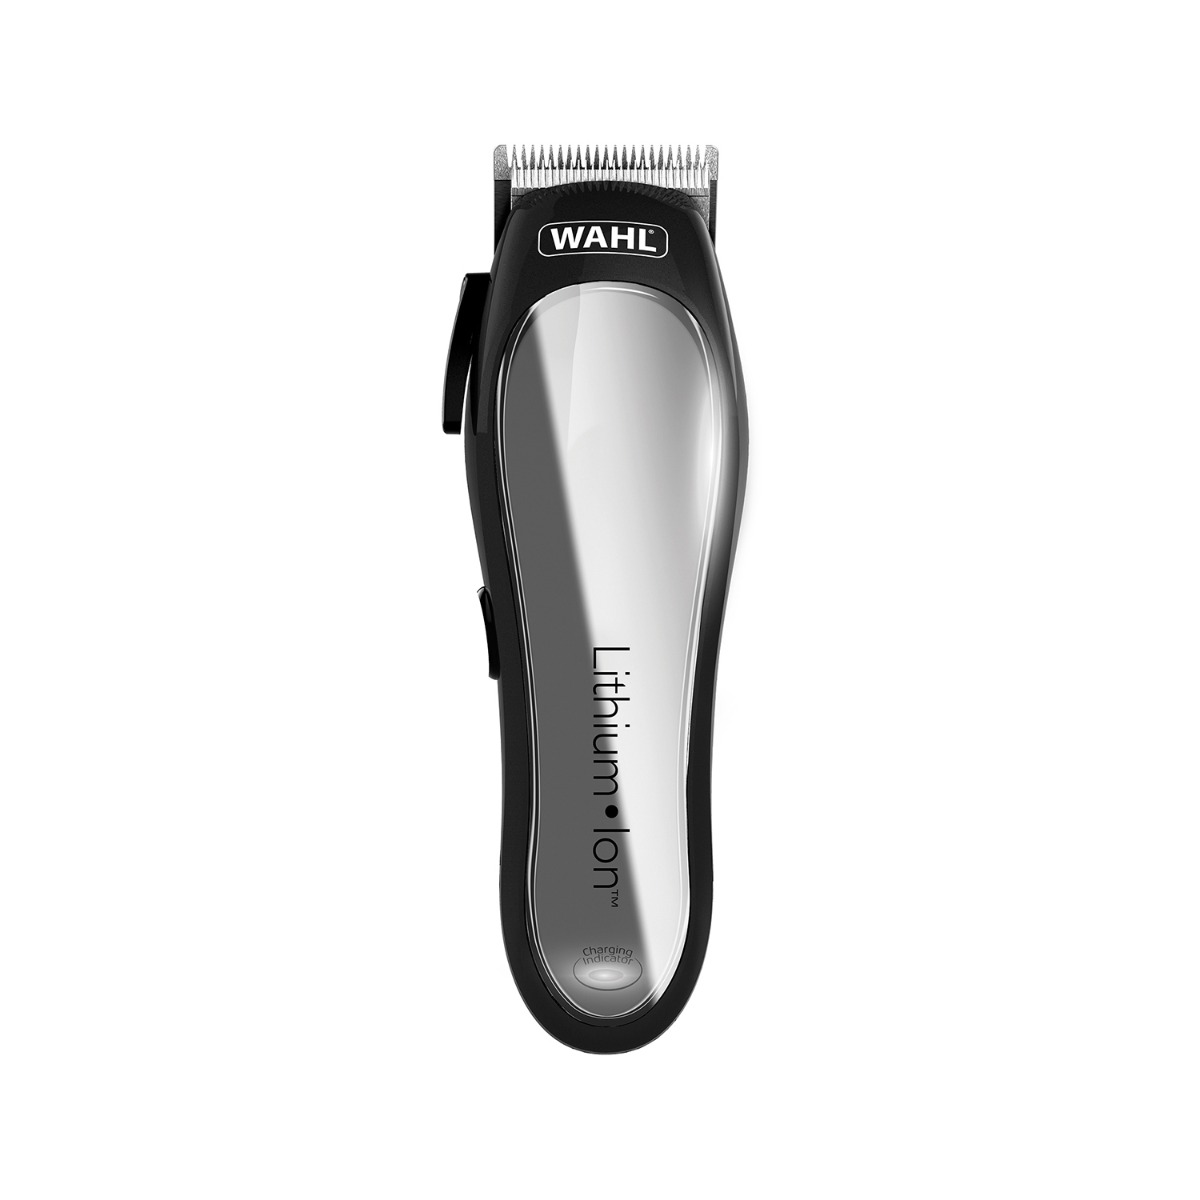 WAHL 79600-3116 Lithium Ion Clipper WAHL